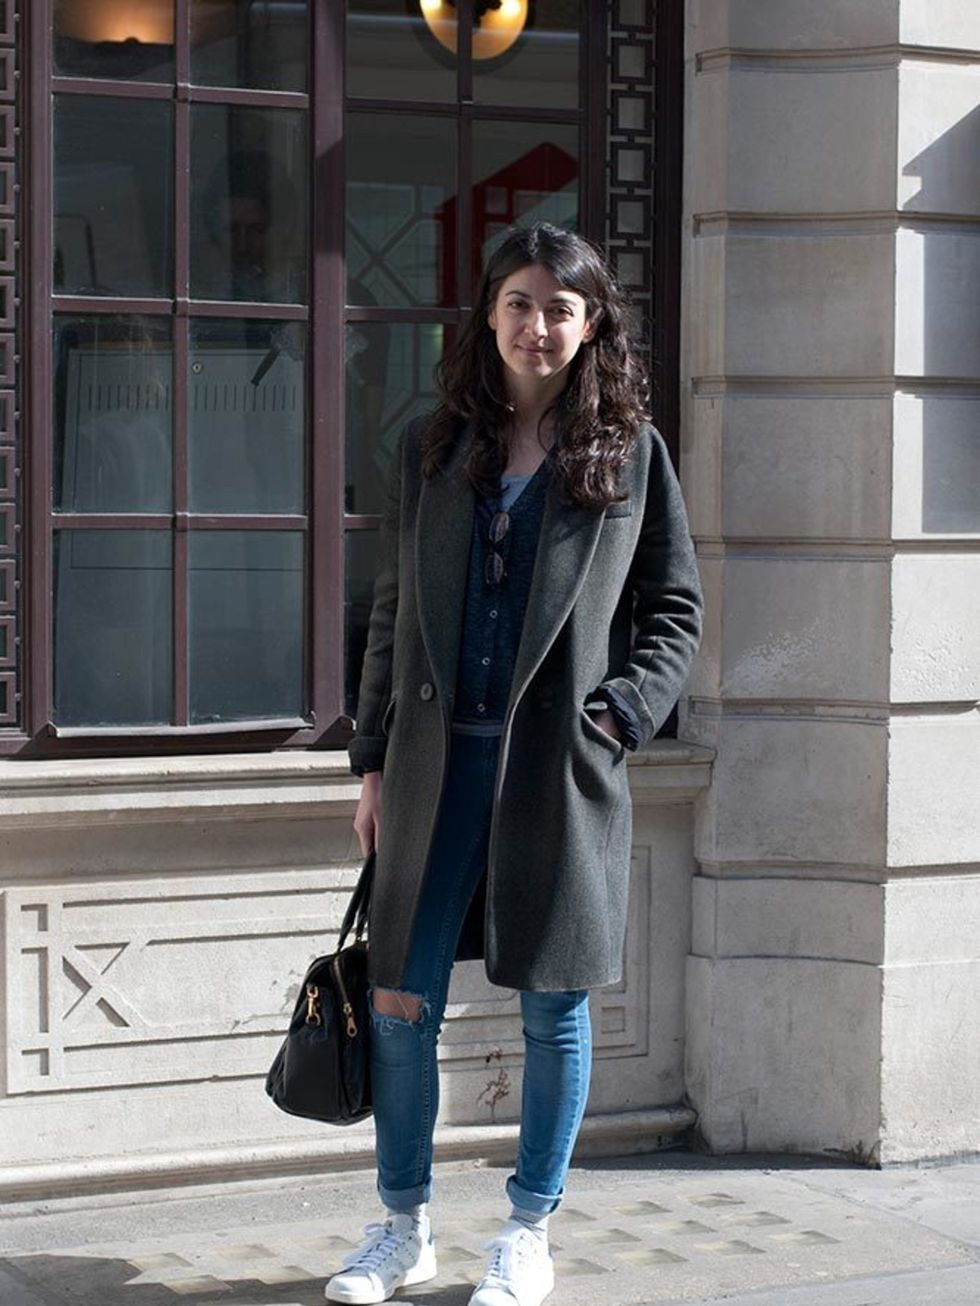 <p>Hannah Swerling, Commissioning Editor</p>

<p>Vanessa Bruno coat, Whistles jeans and cardigan, Adidas trainers, Marc by Marc Jacobs handbag, Oliver Peoples glasses</p>